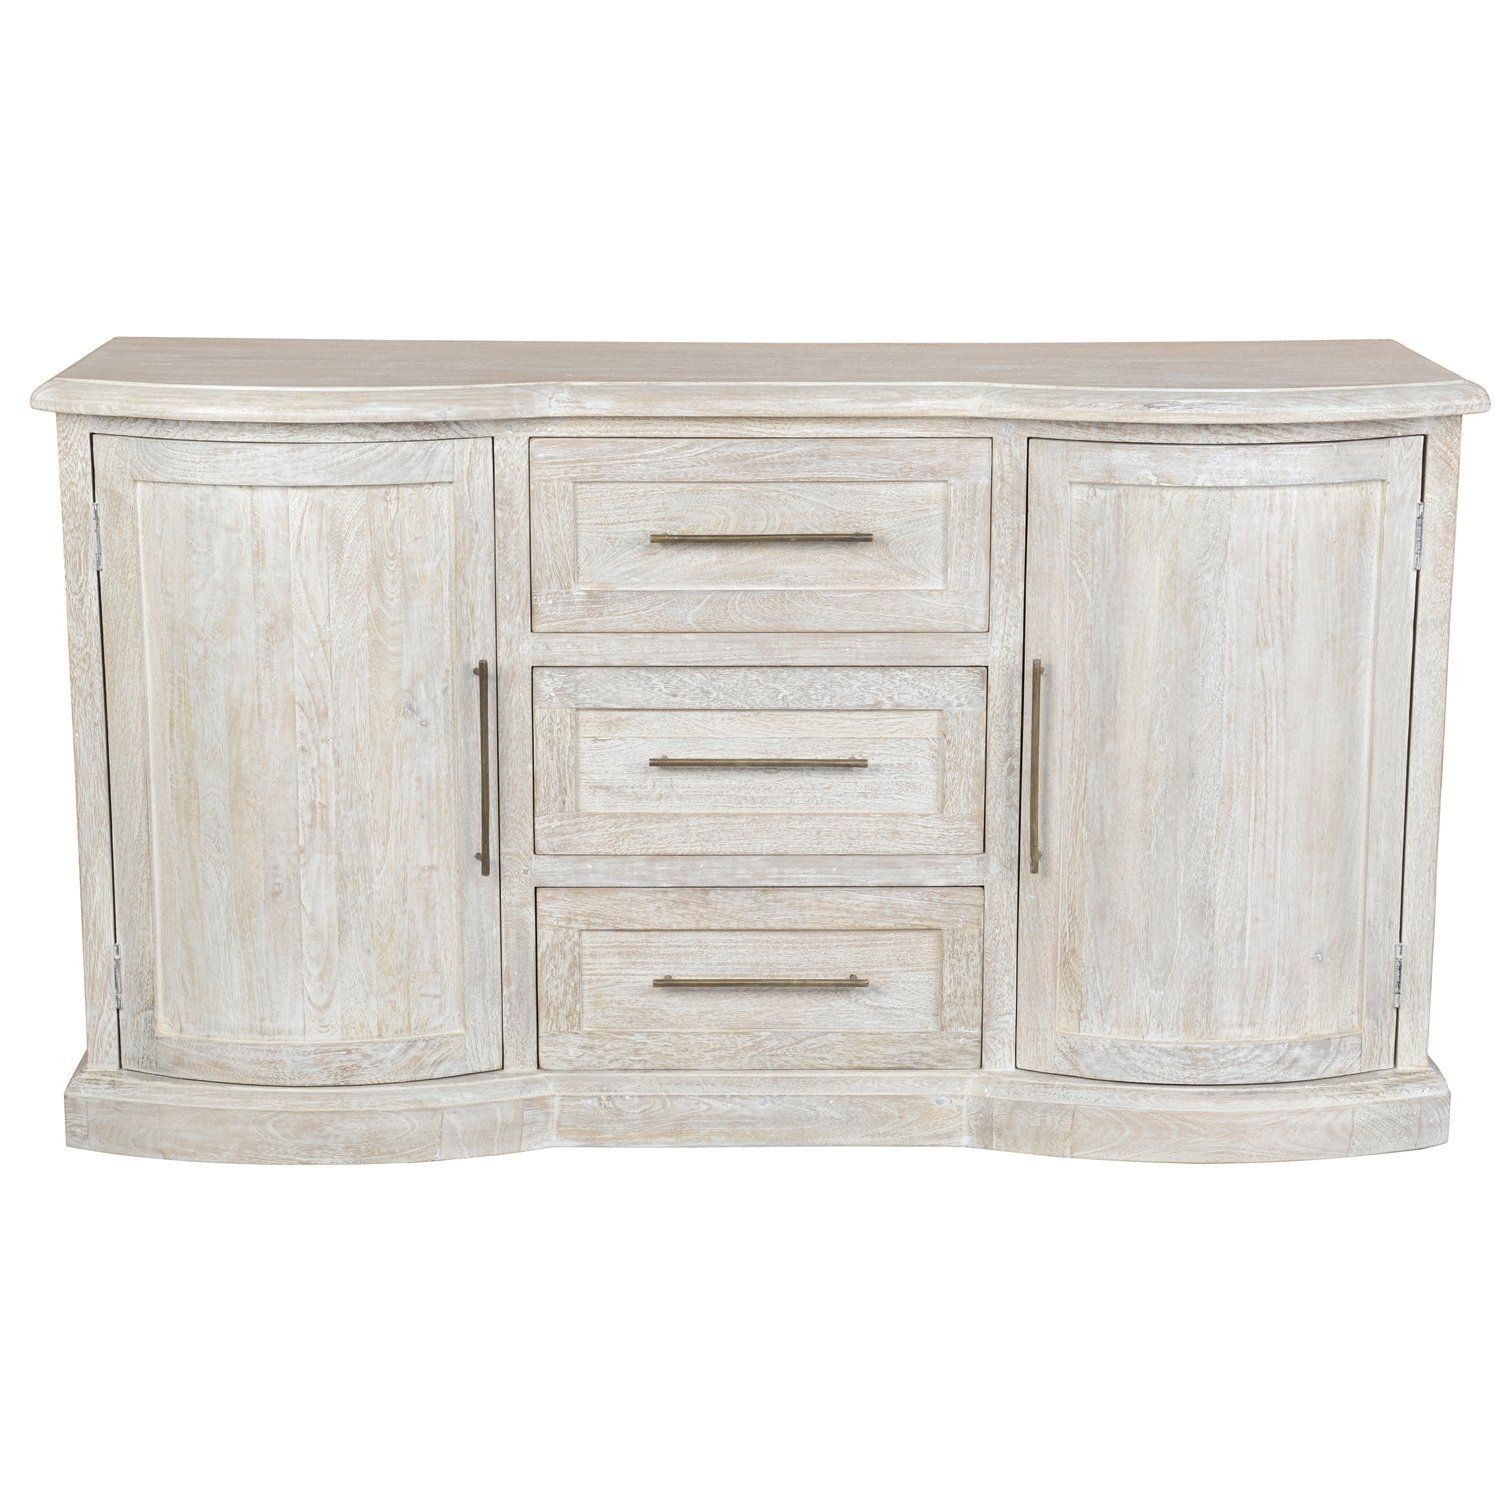 Shop Norman Antique White Sideboardkosas Home – Free Shipping Inside Recent Natural Oak Wood 78 Inch Sideboards (View 18 of 20)